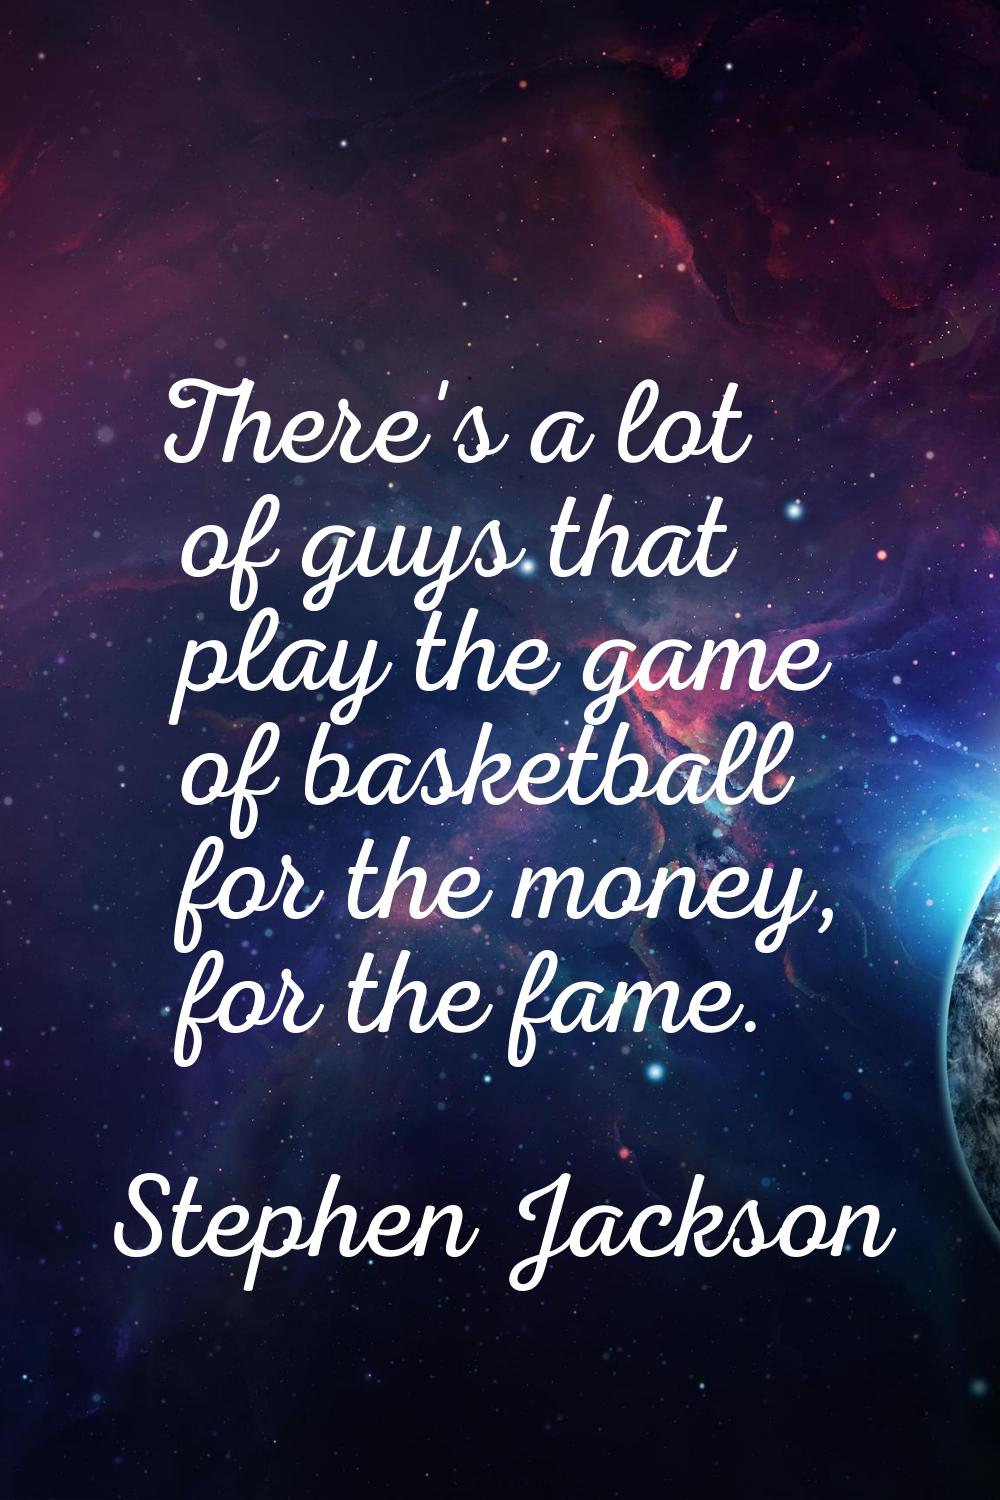 There's a lot of guys that play the game of basketball for the money, for the fame.